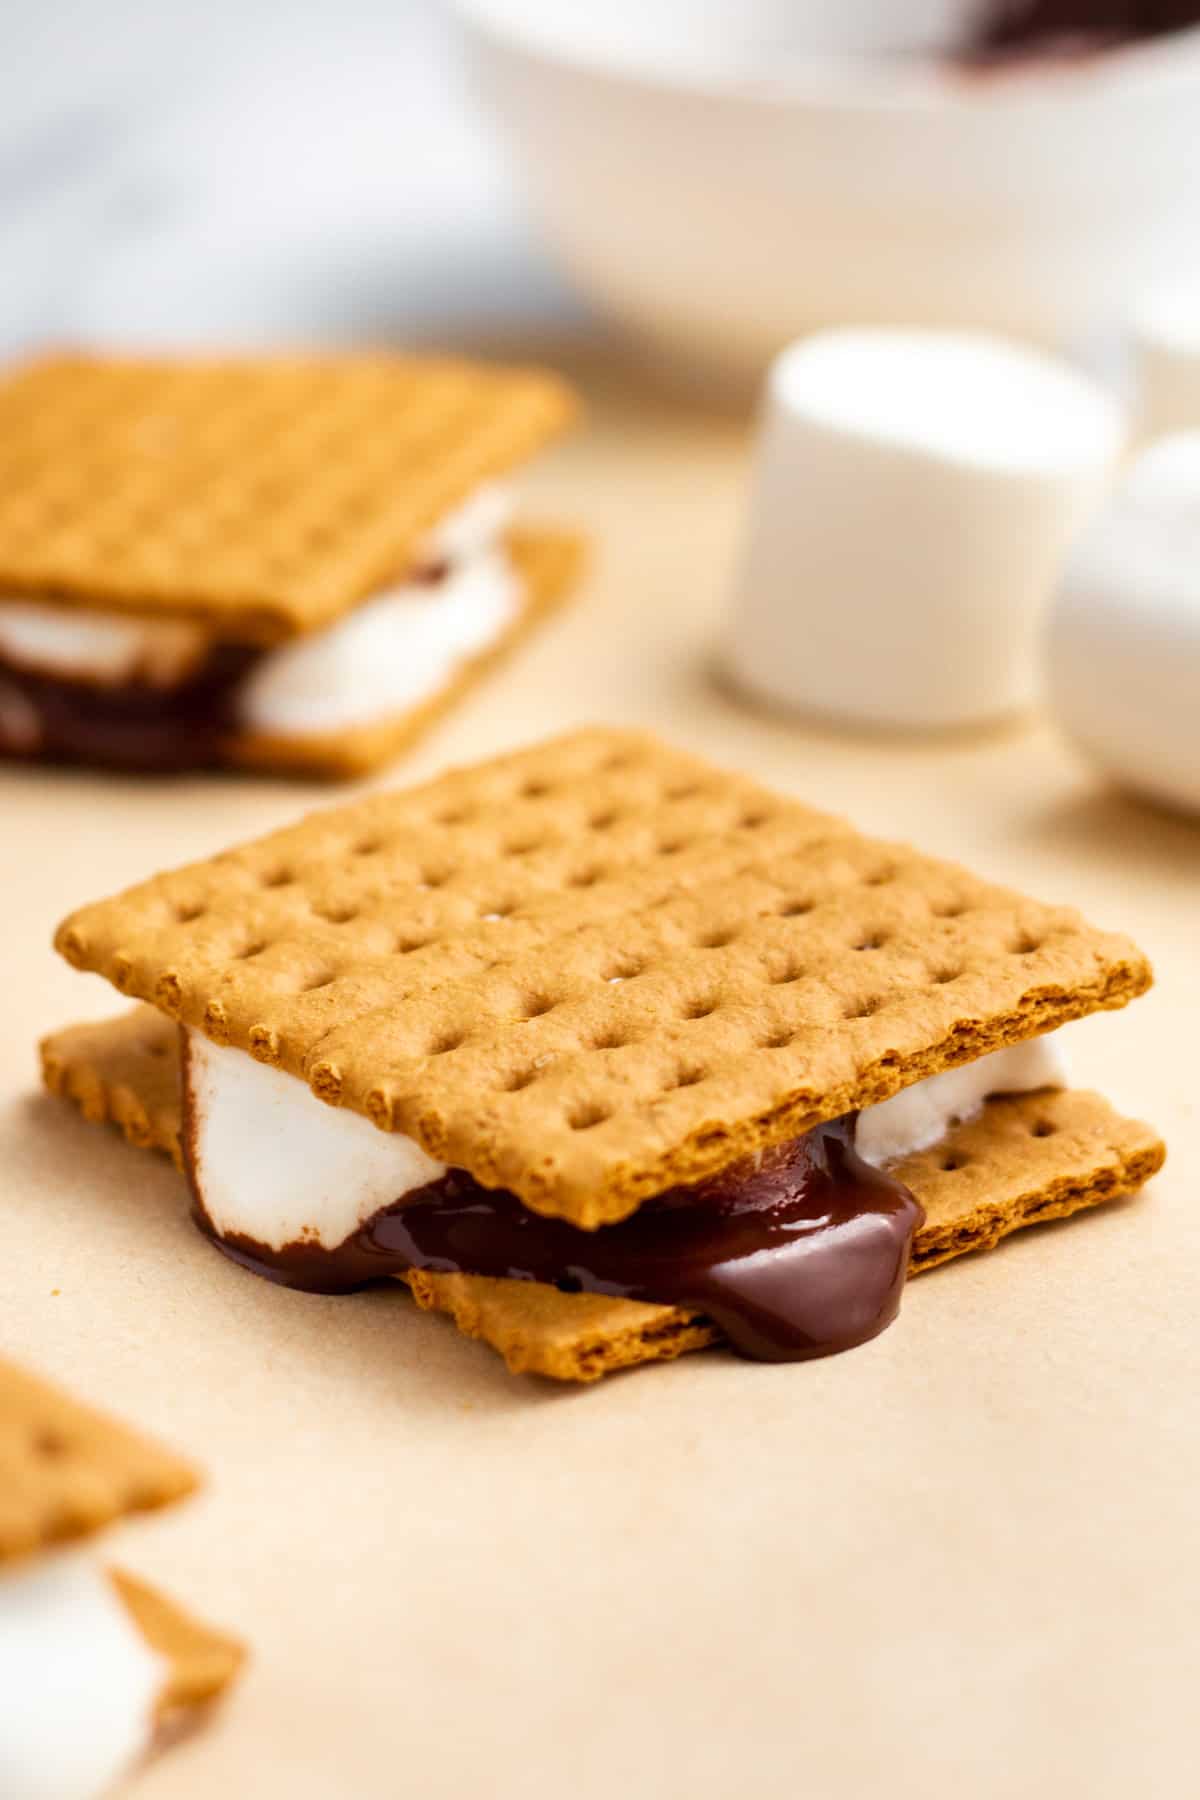 a s'more made in the microwave on a parchment paper